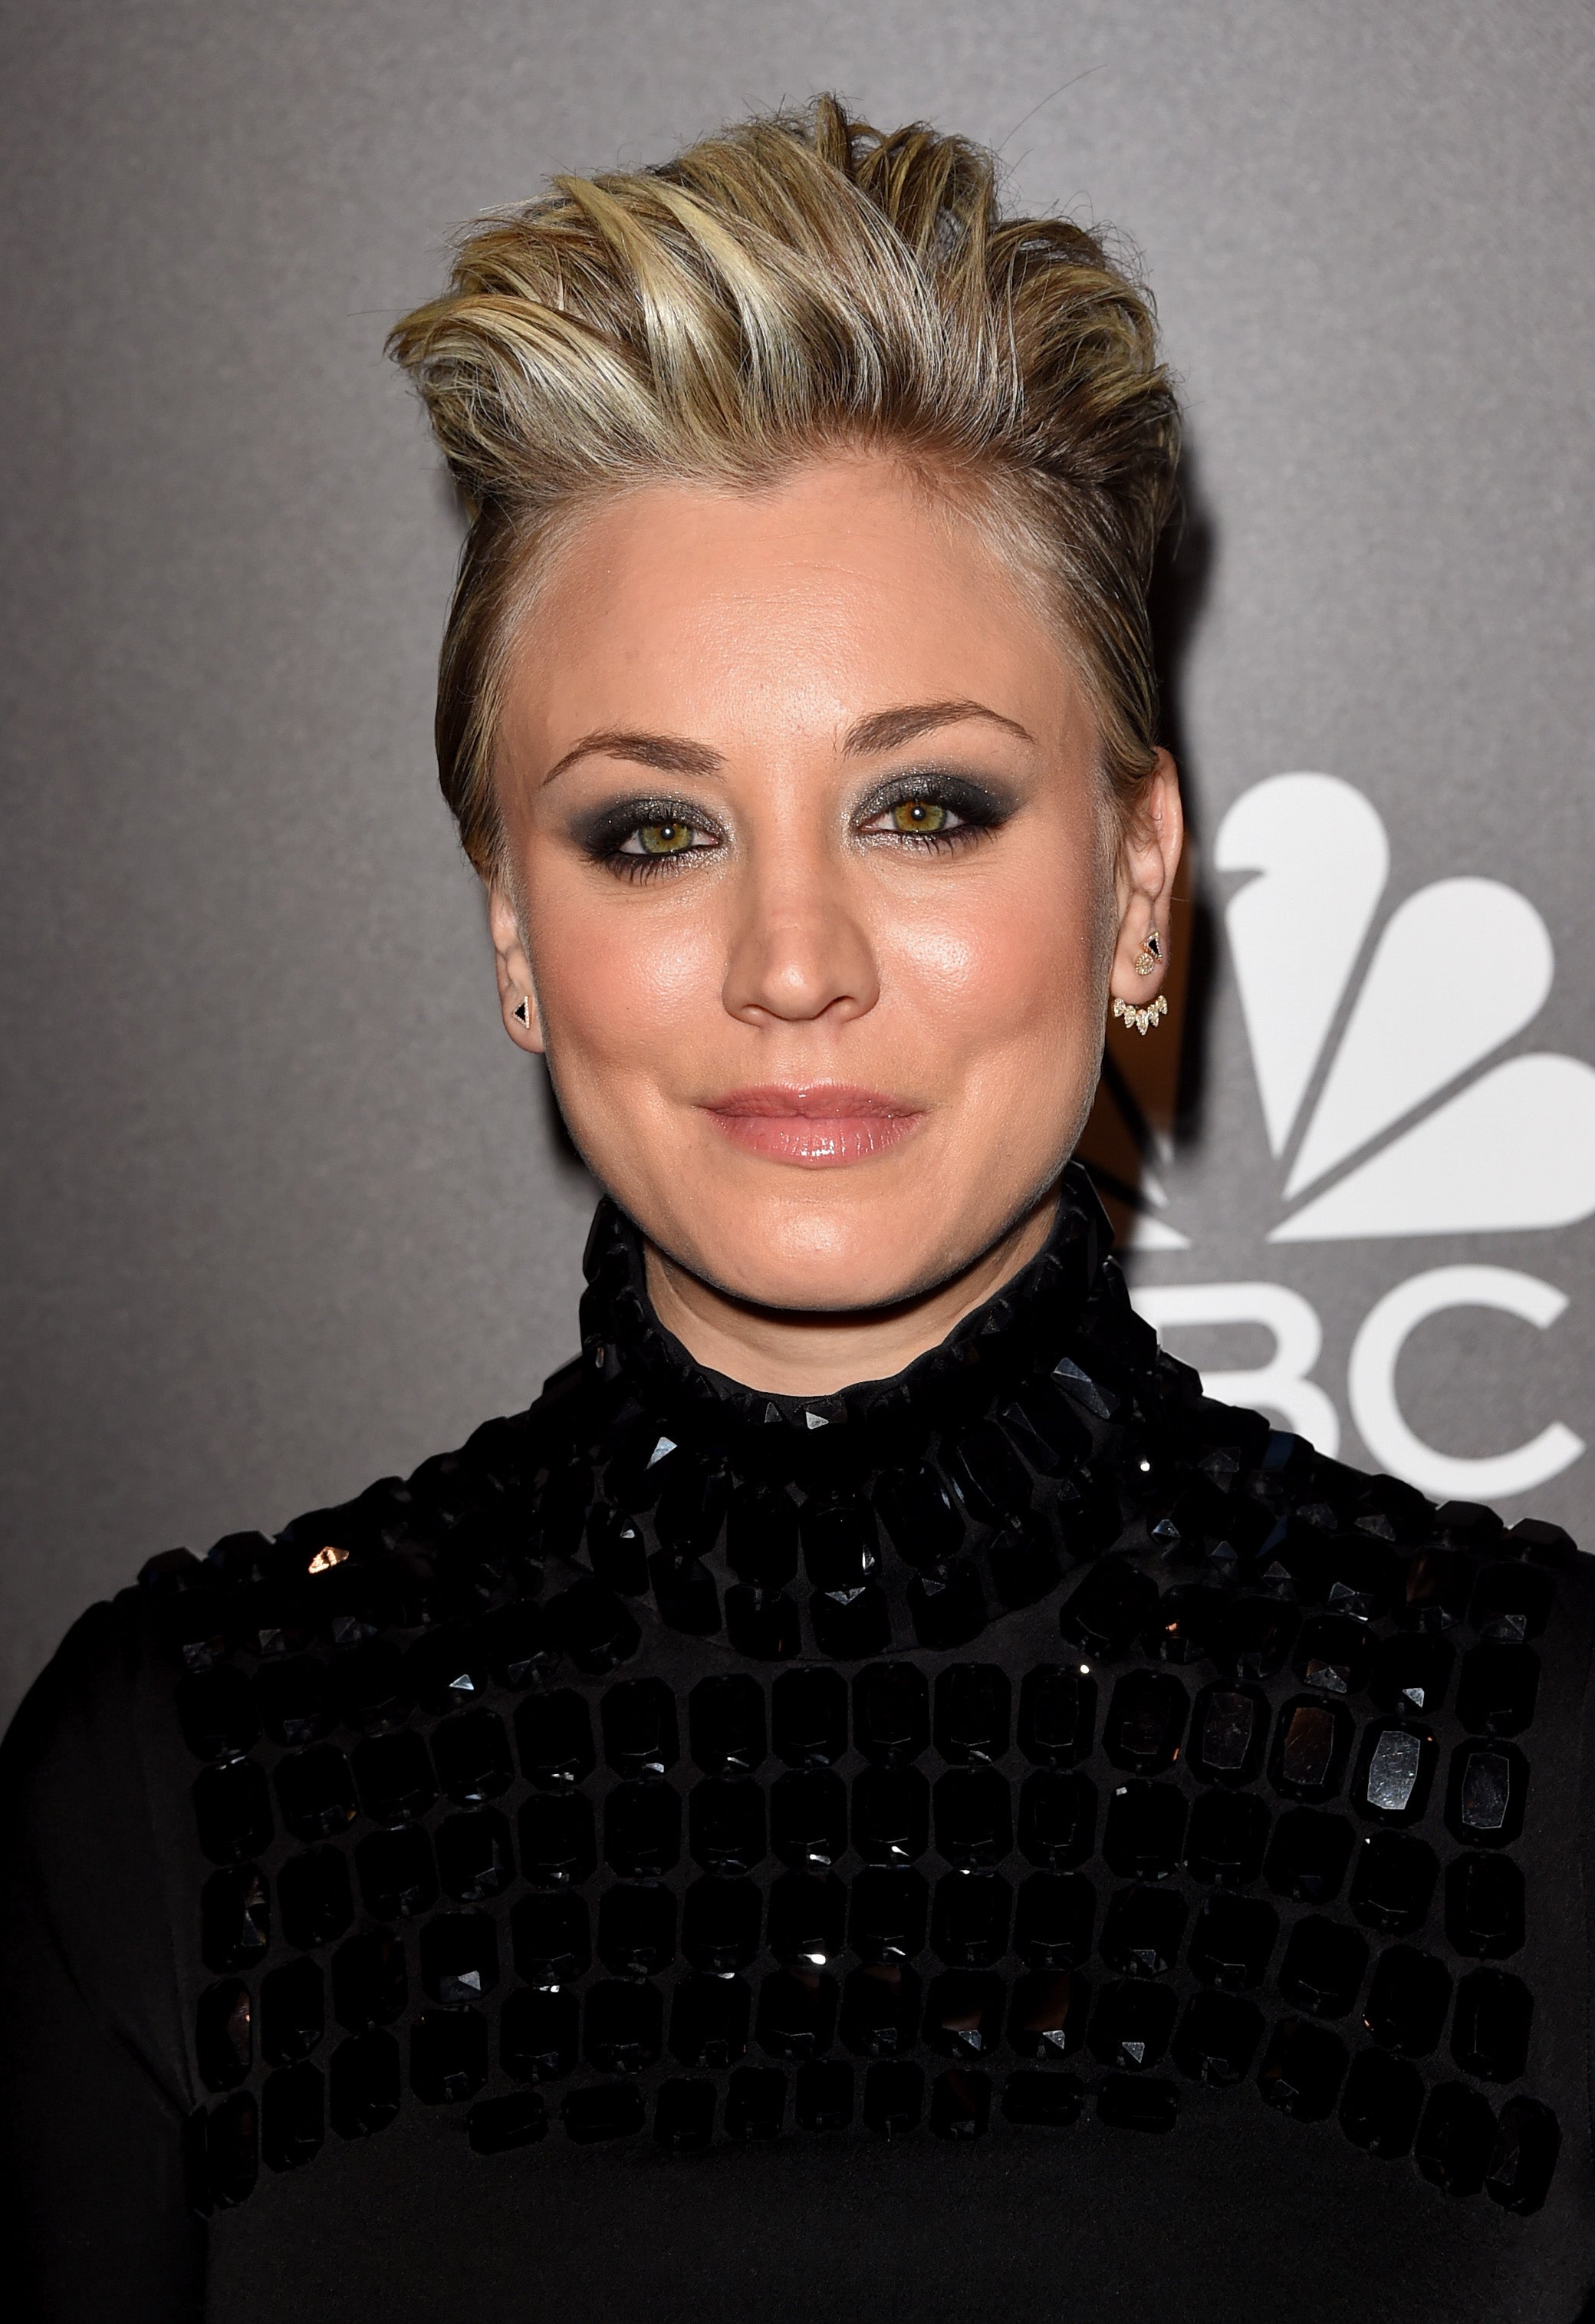 Kaley Cuoco Sweeting claims her comments about feminism were taken out of context